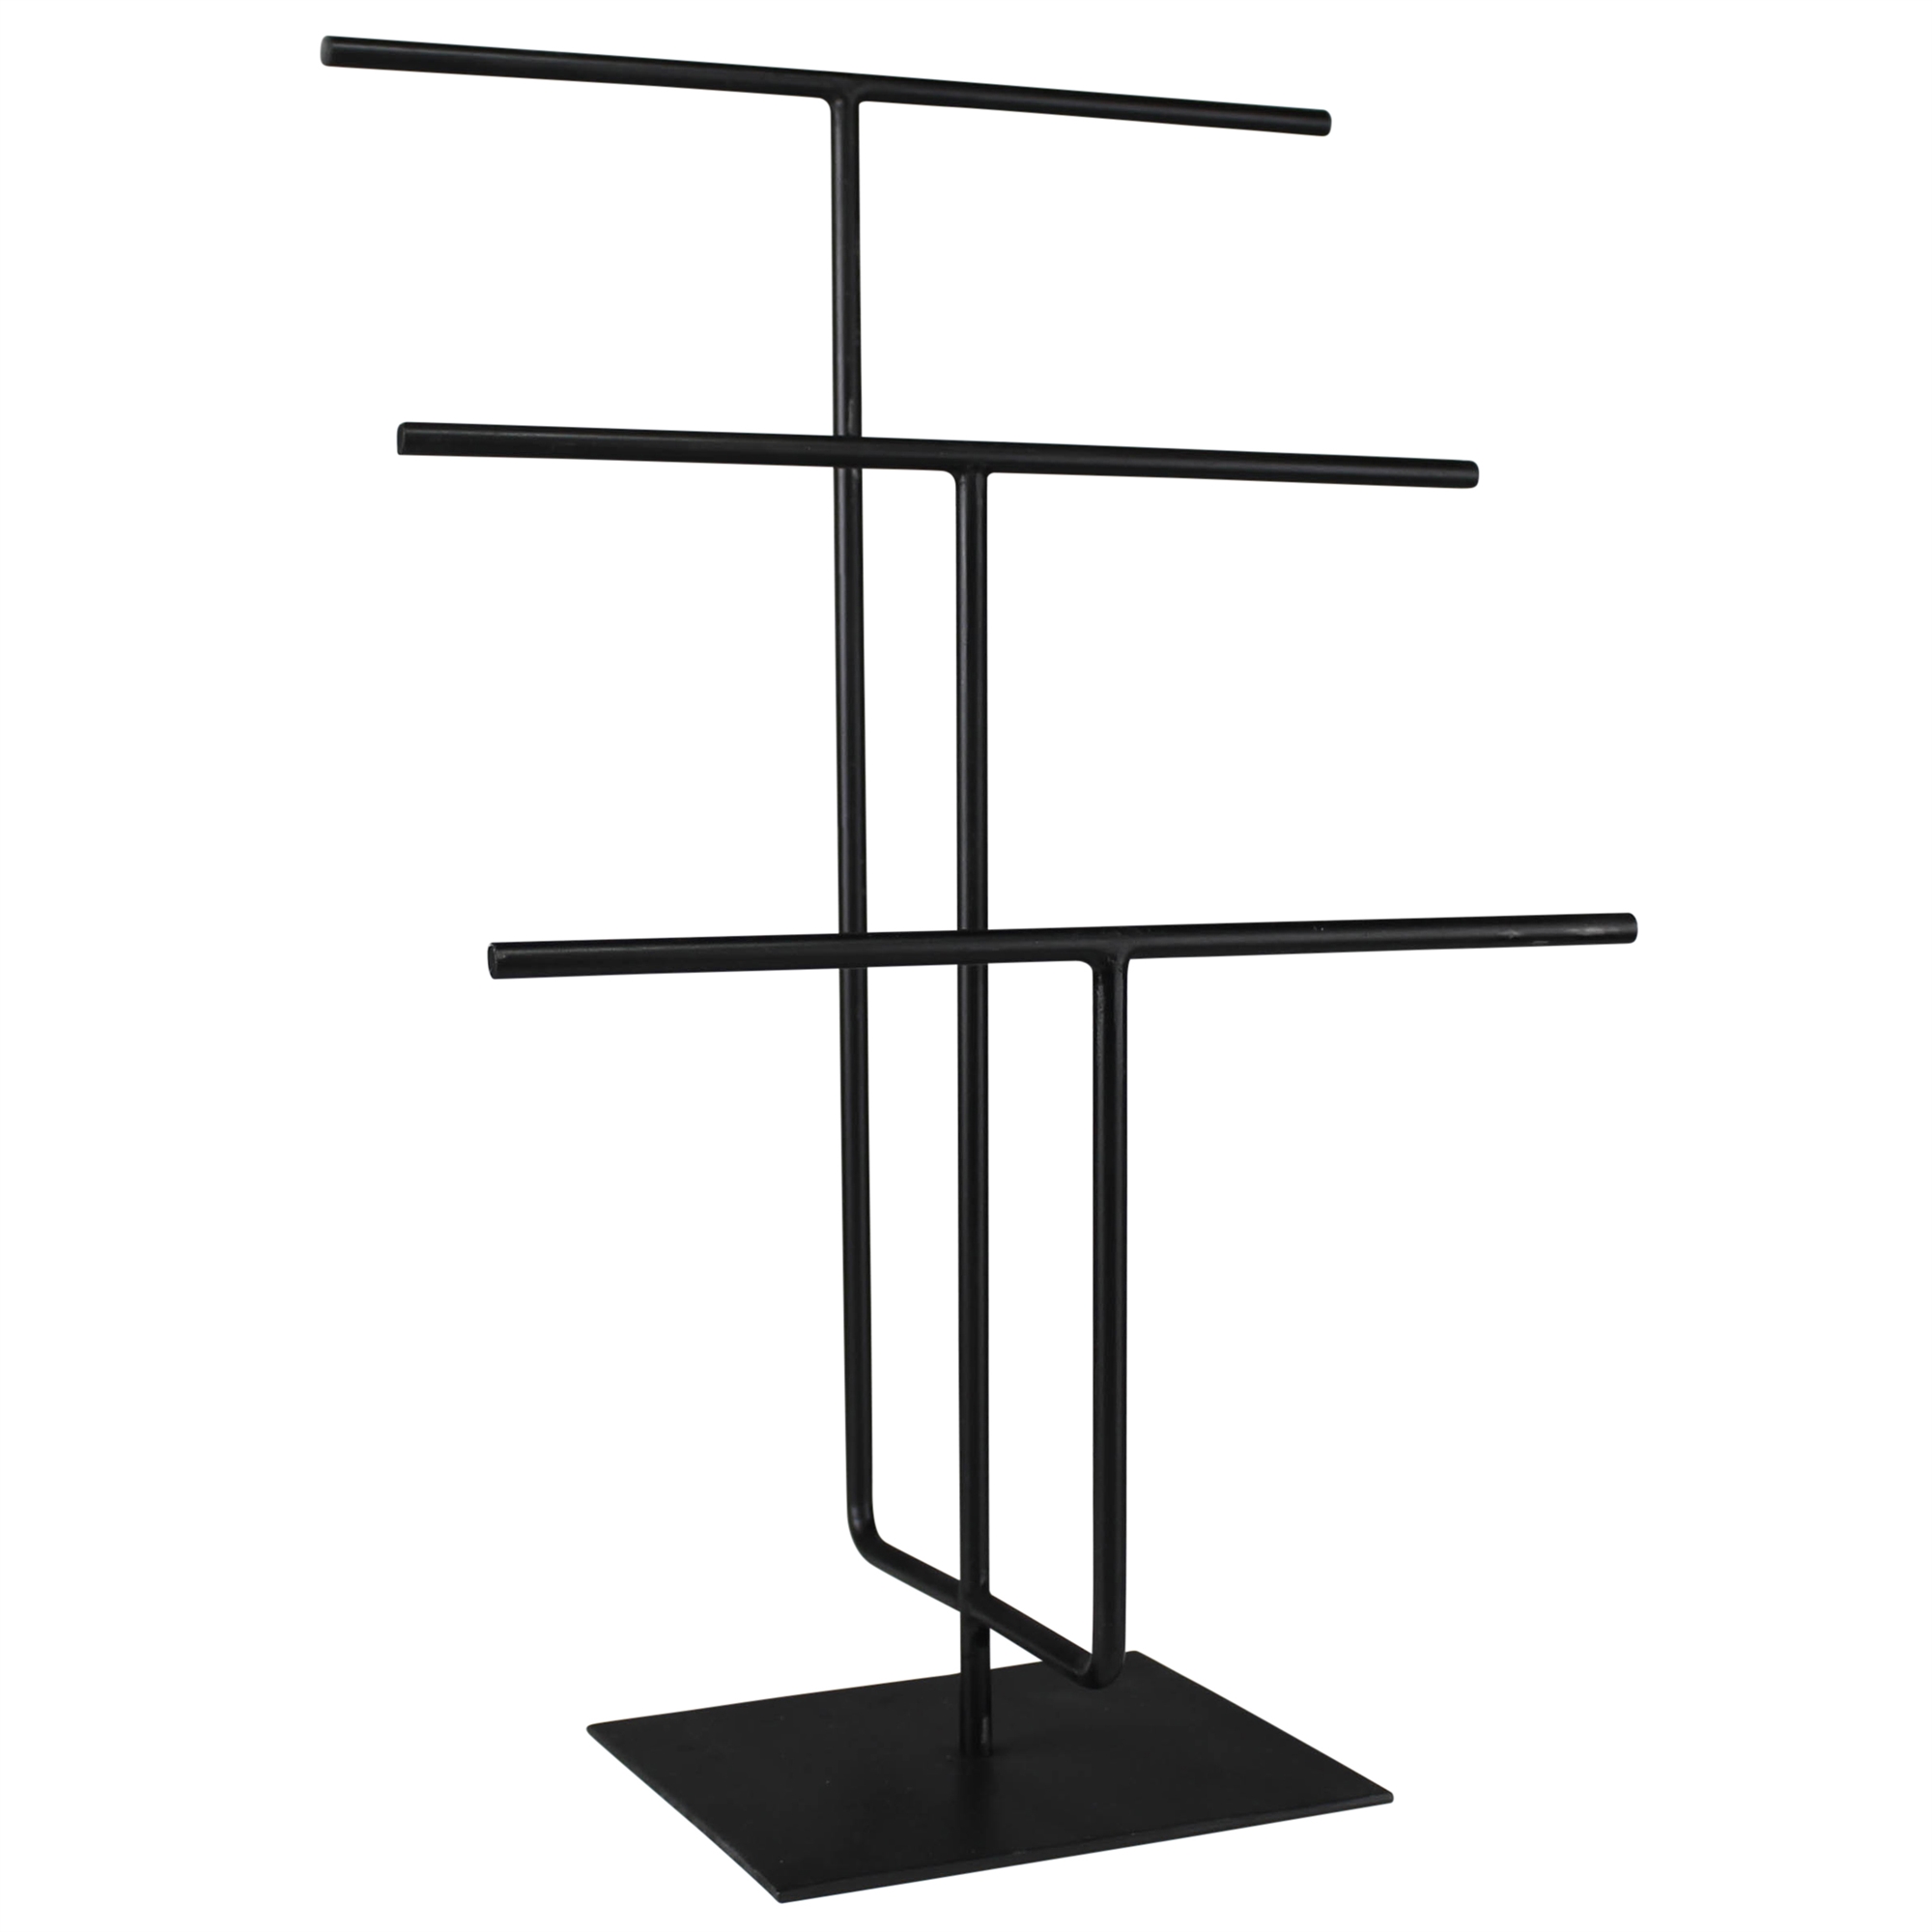 Lynn Black Jewelry Stand by HomArt - Seven Colonial